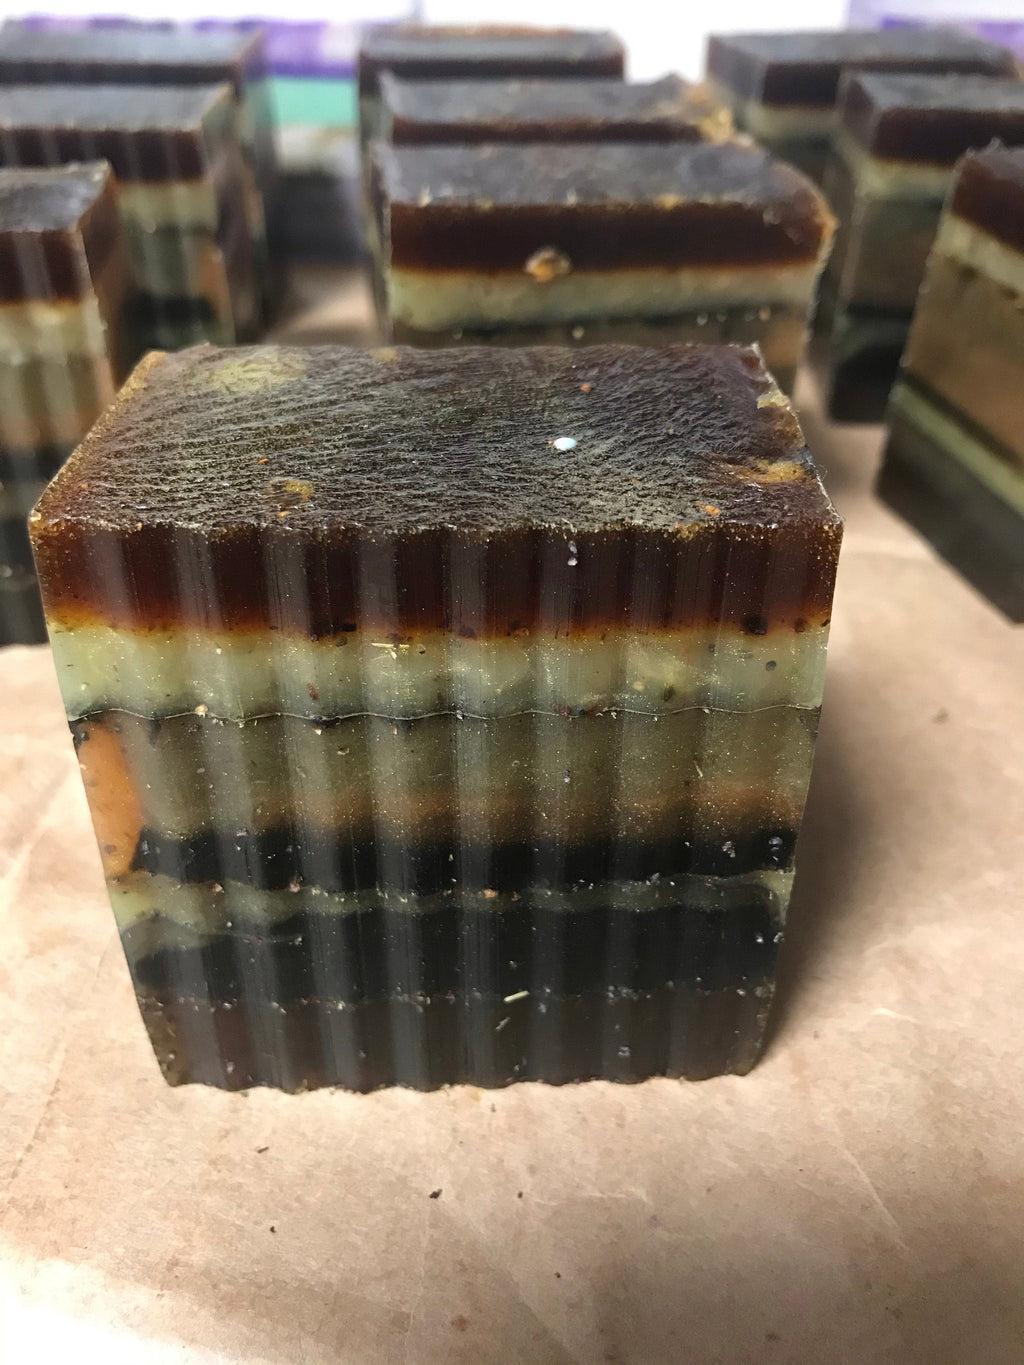 Uplift African Black Soap Activated Charcoal Turmeric Powder Poppy Seeds Lemon Citrus Well-Being Essential Soap Bar